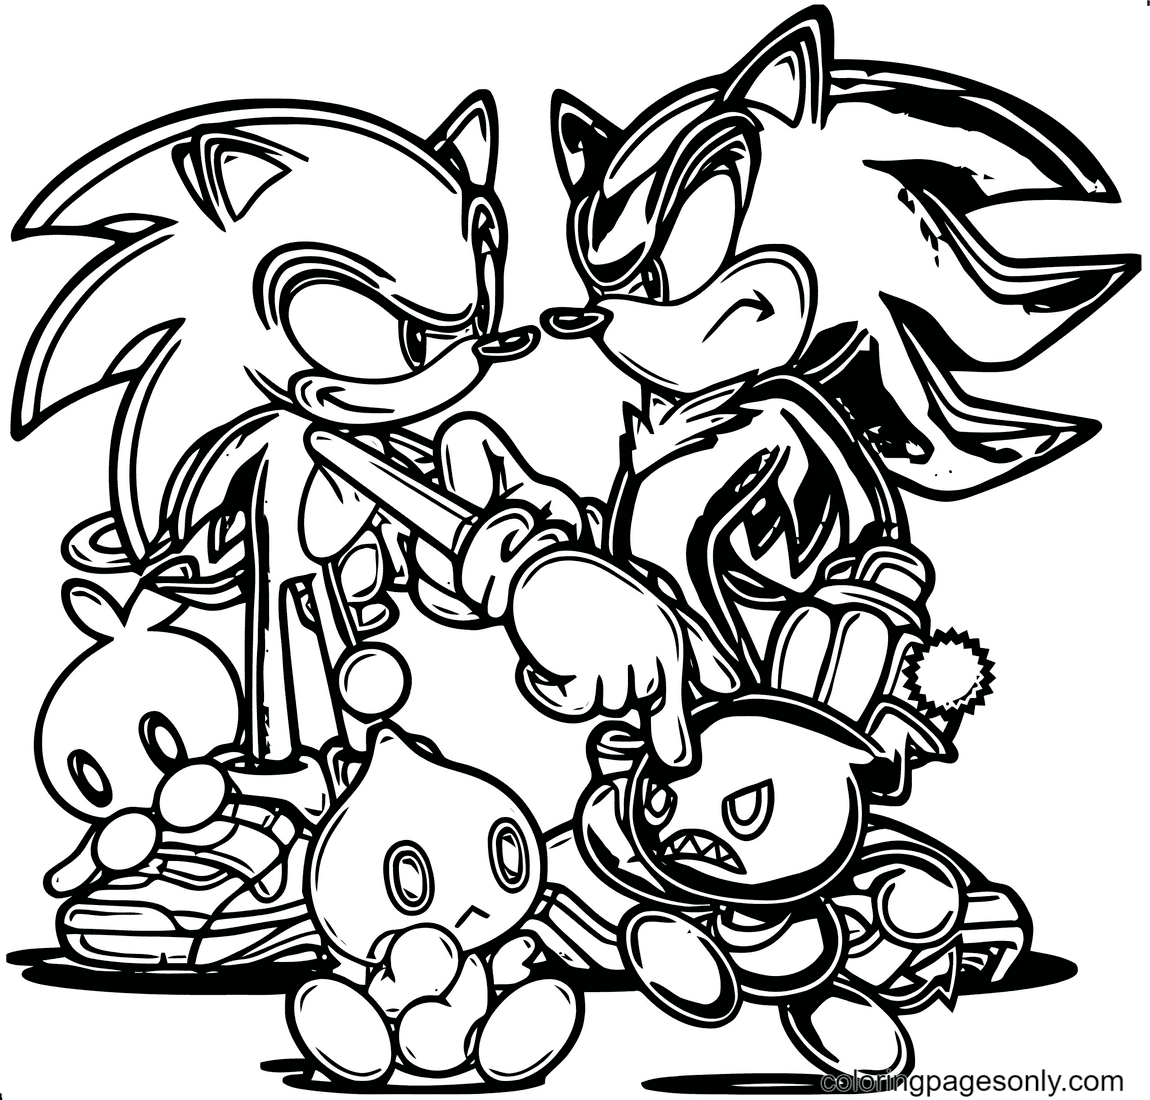 Super sonic with super shadow and cheese coloring page